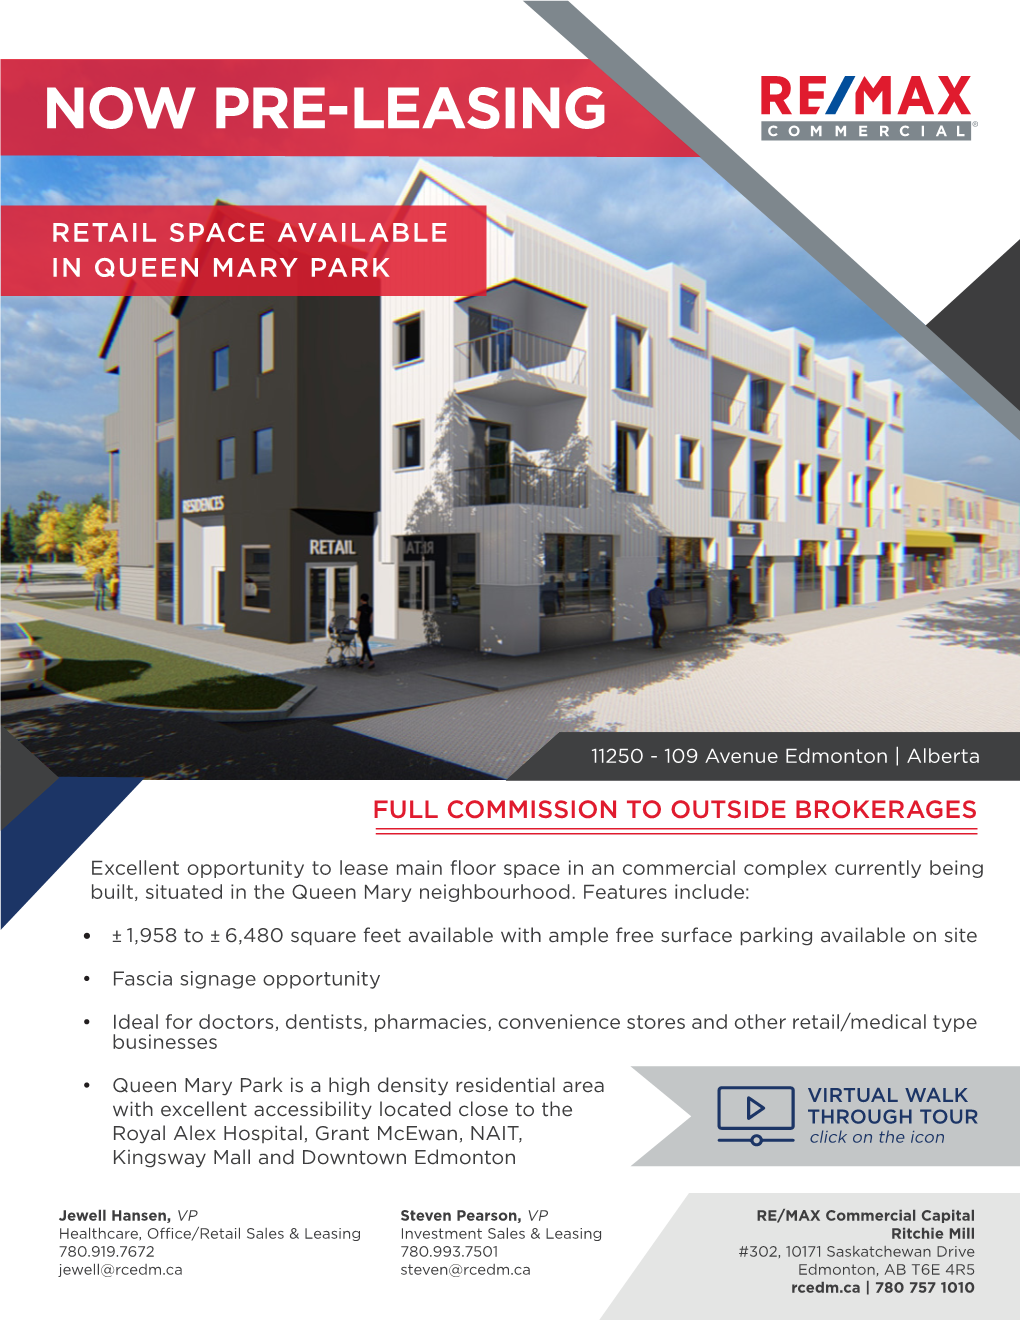 Now Pre-Leasing